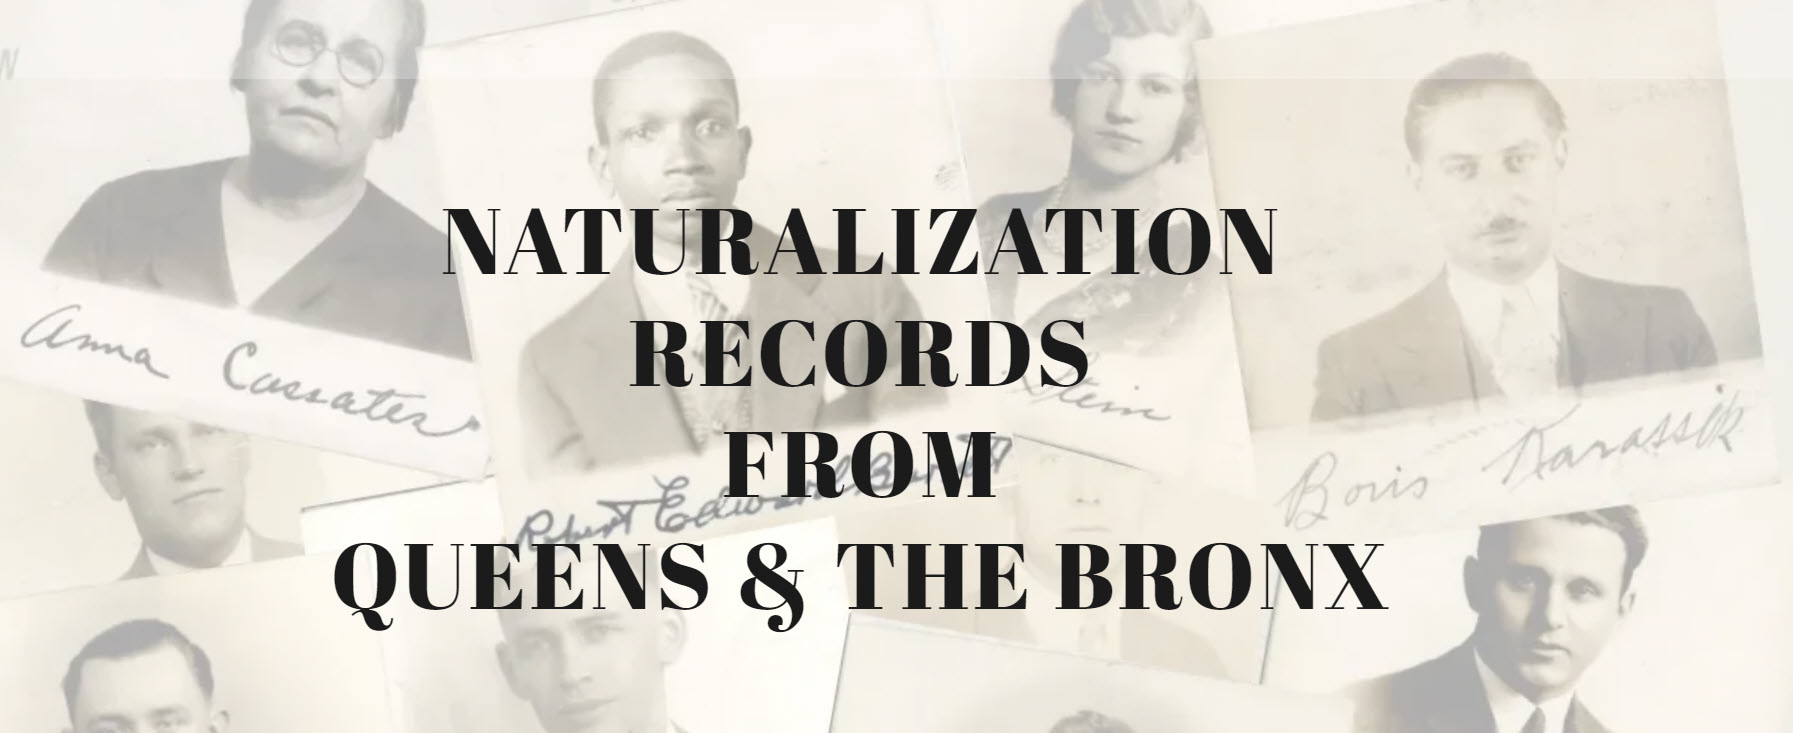 The County Clerk's offices of Queens County and Bronx County in New York announced a collaborative effort along with the National Archives to provide FREE online access to over 250,000 naturalization records from 1795 to 1952.